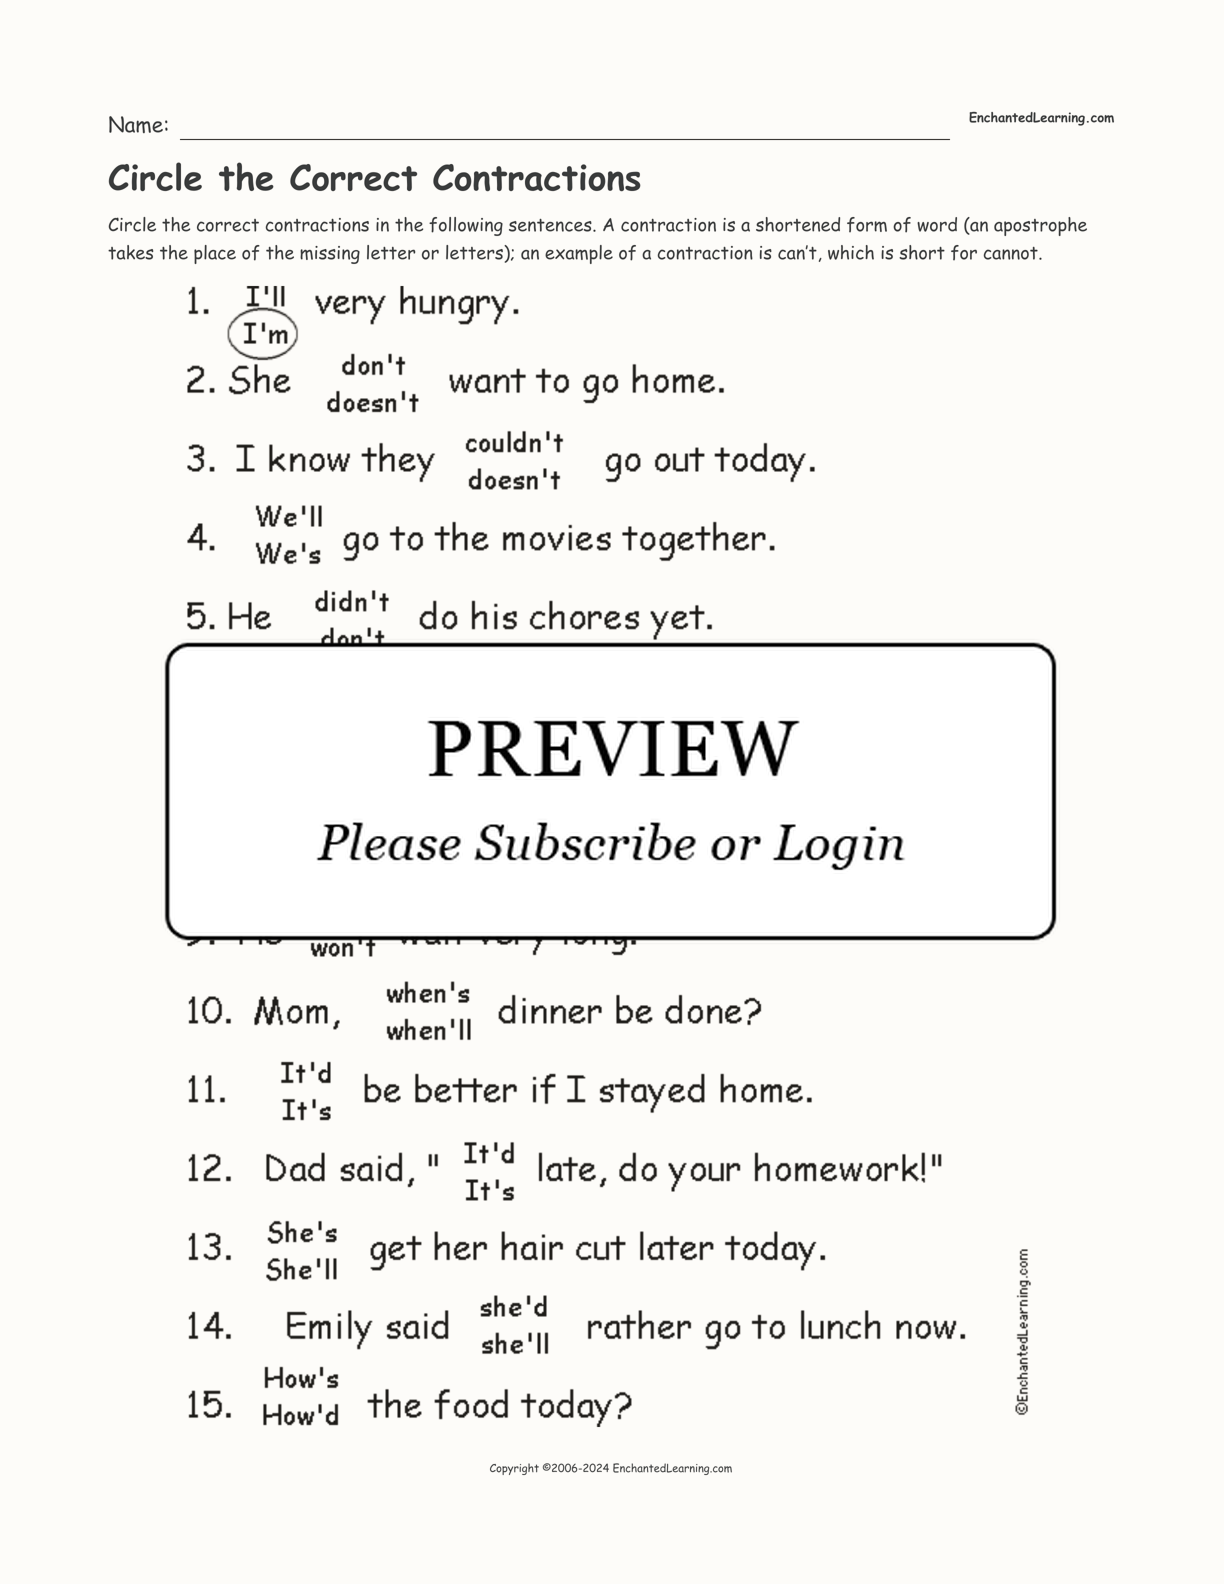 Circle the Correct Contractions interactive worksheet page 1